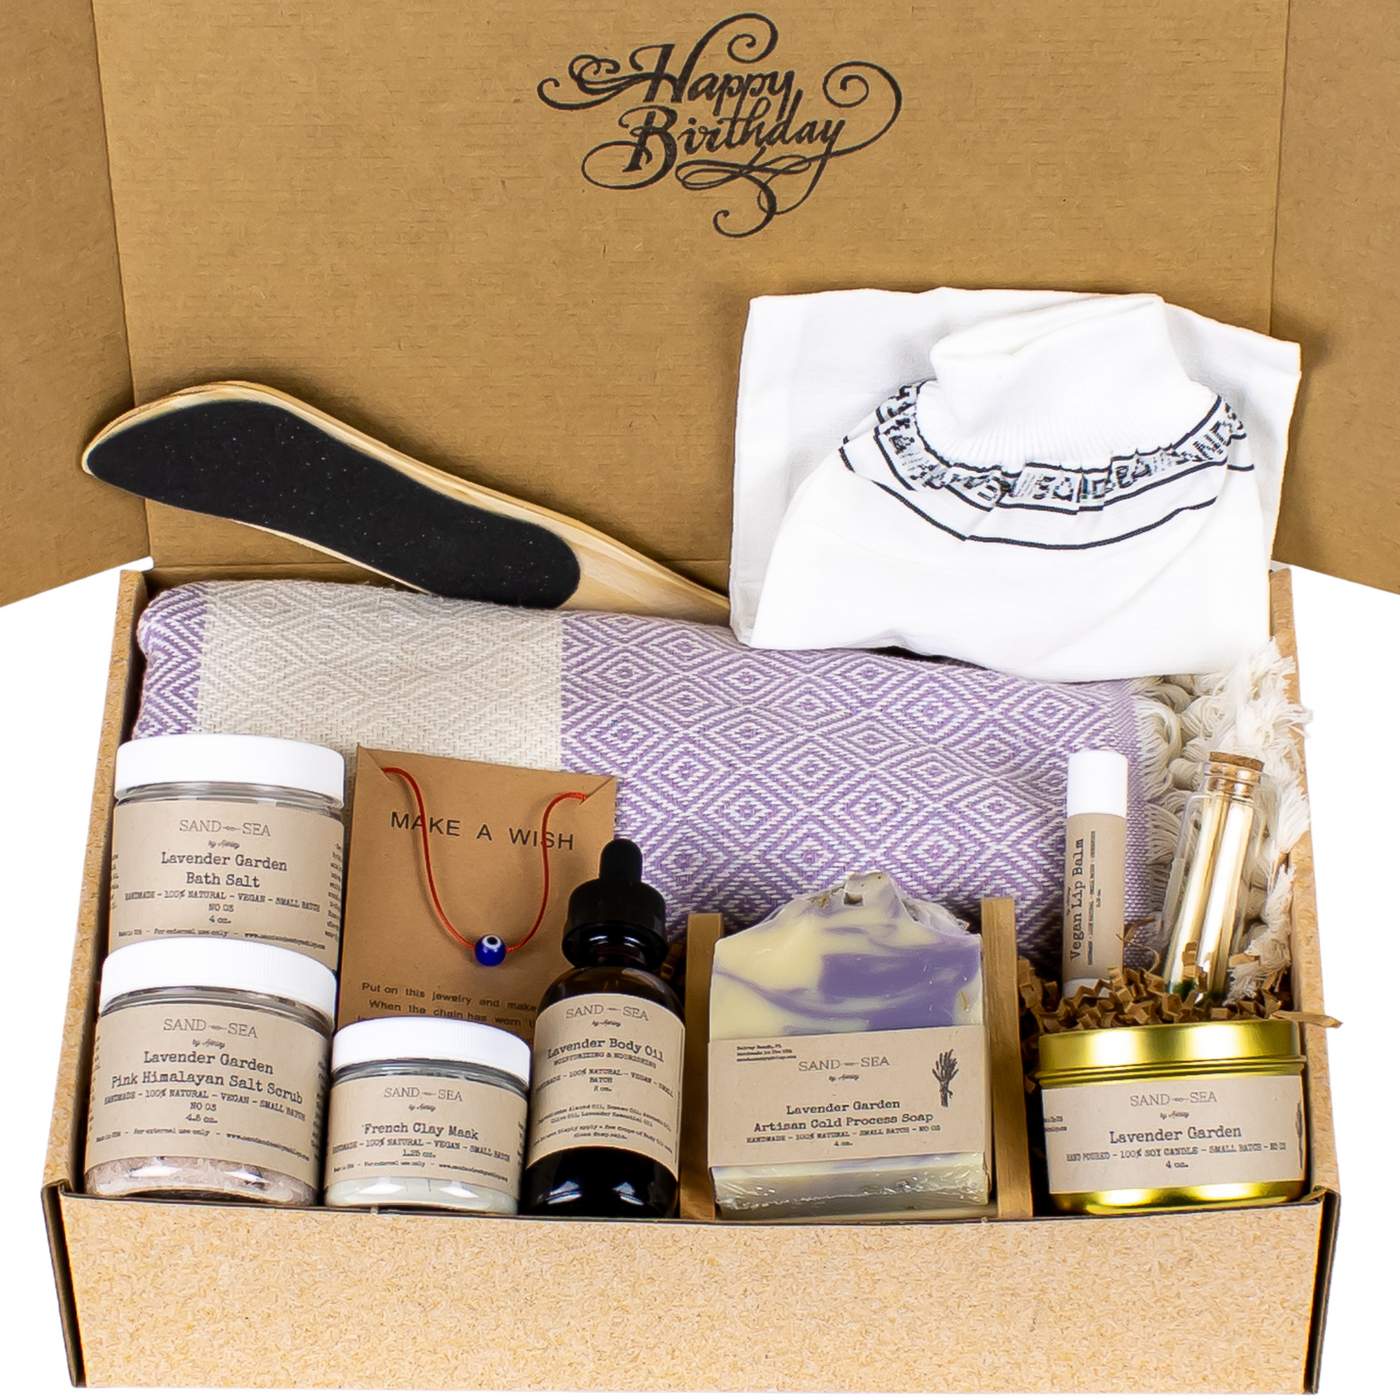 Birthday Spa Gift Baskets for Women - Handmade Unique and Pampering Stress Relief Lavender Spa Gift Box for Her Birthday - 13 pieces